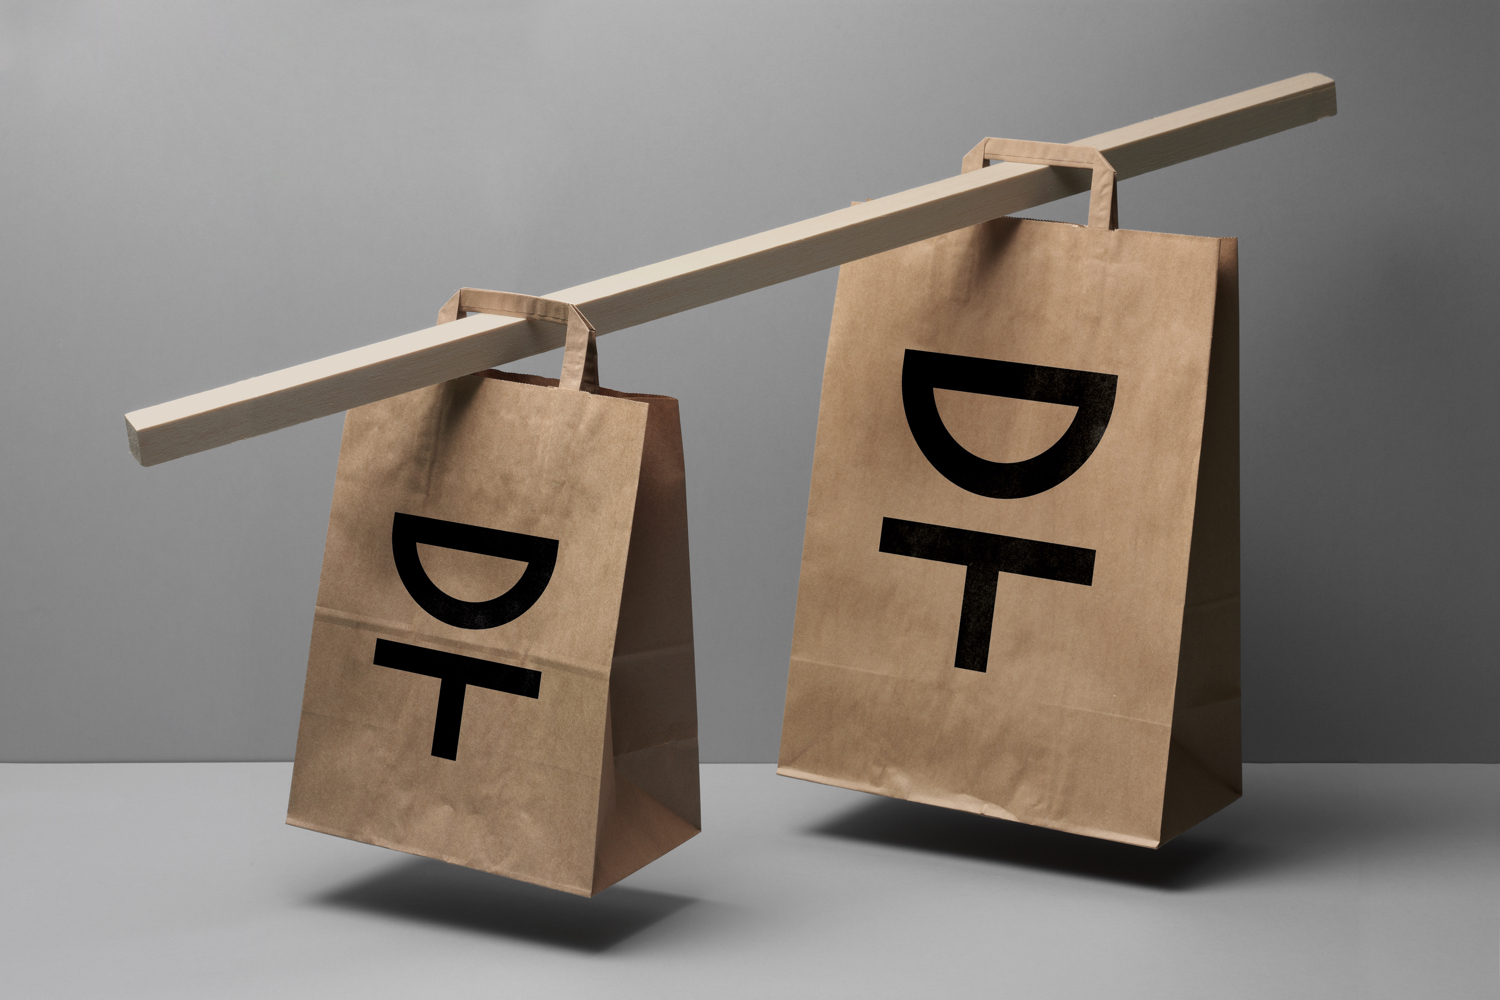 Logo and unbleached carrier bag by Kurppa Hosk for Swedish contemporary furniture, art and design curator and retailer Designtorget